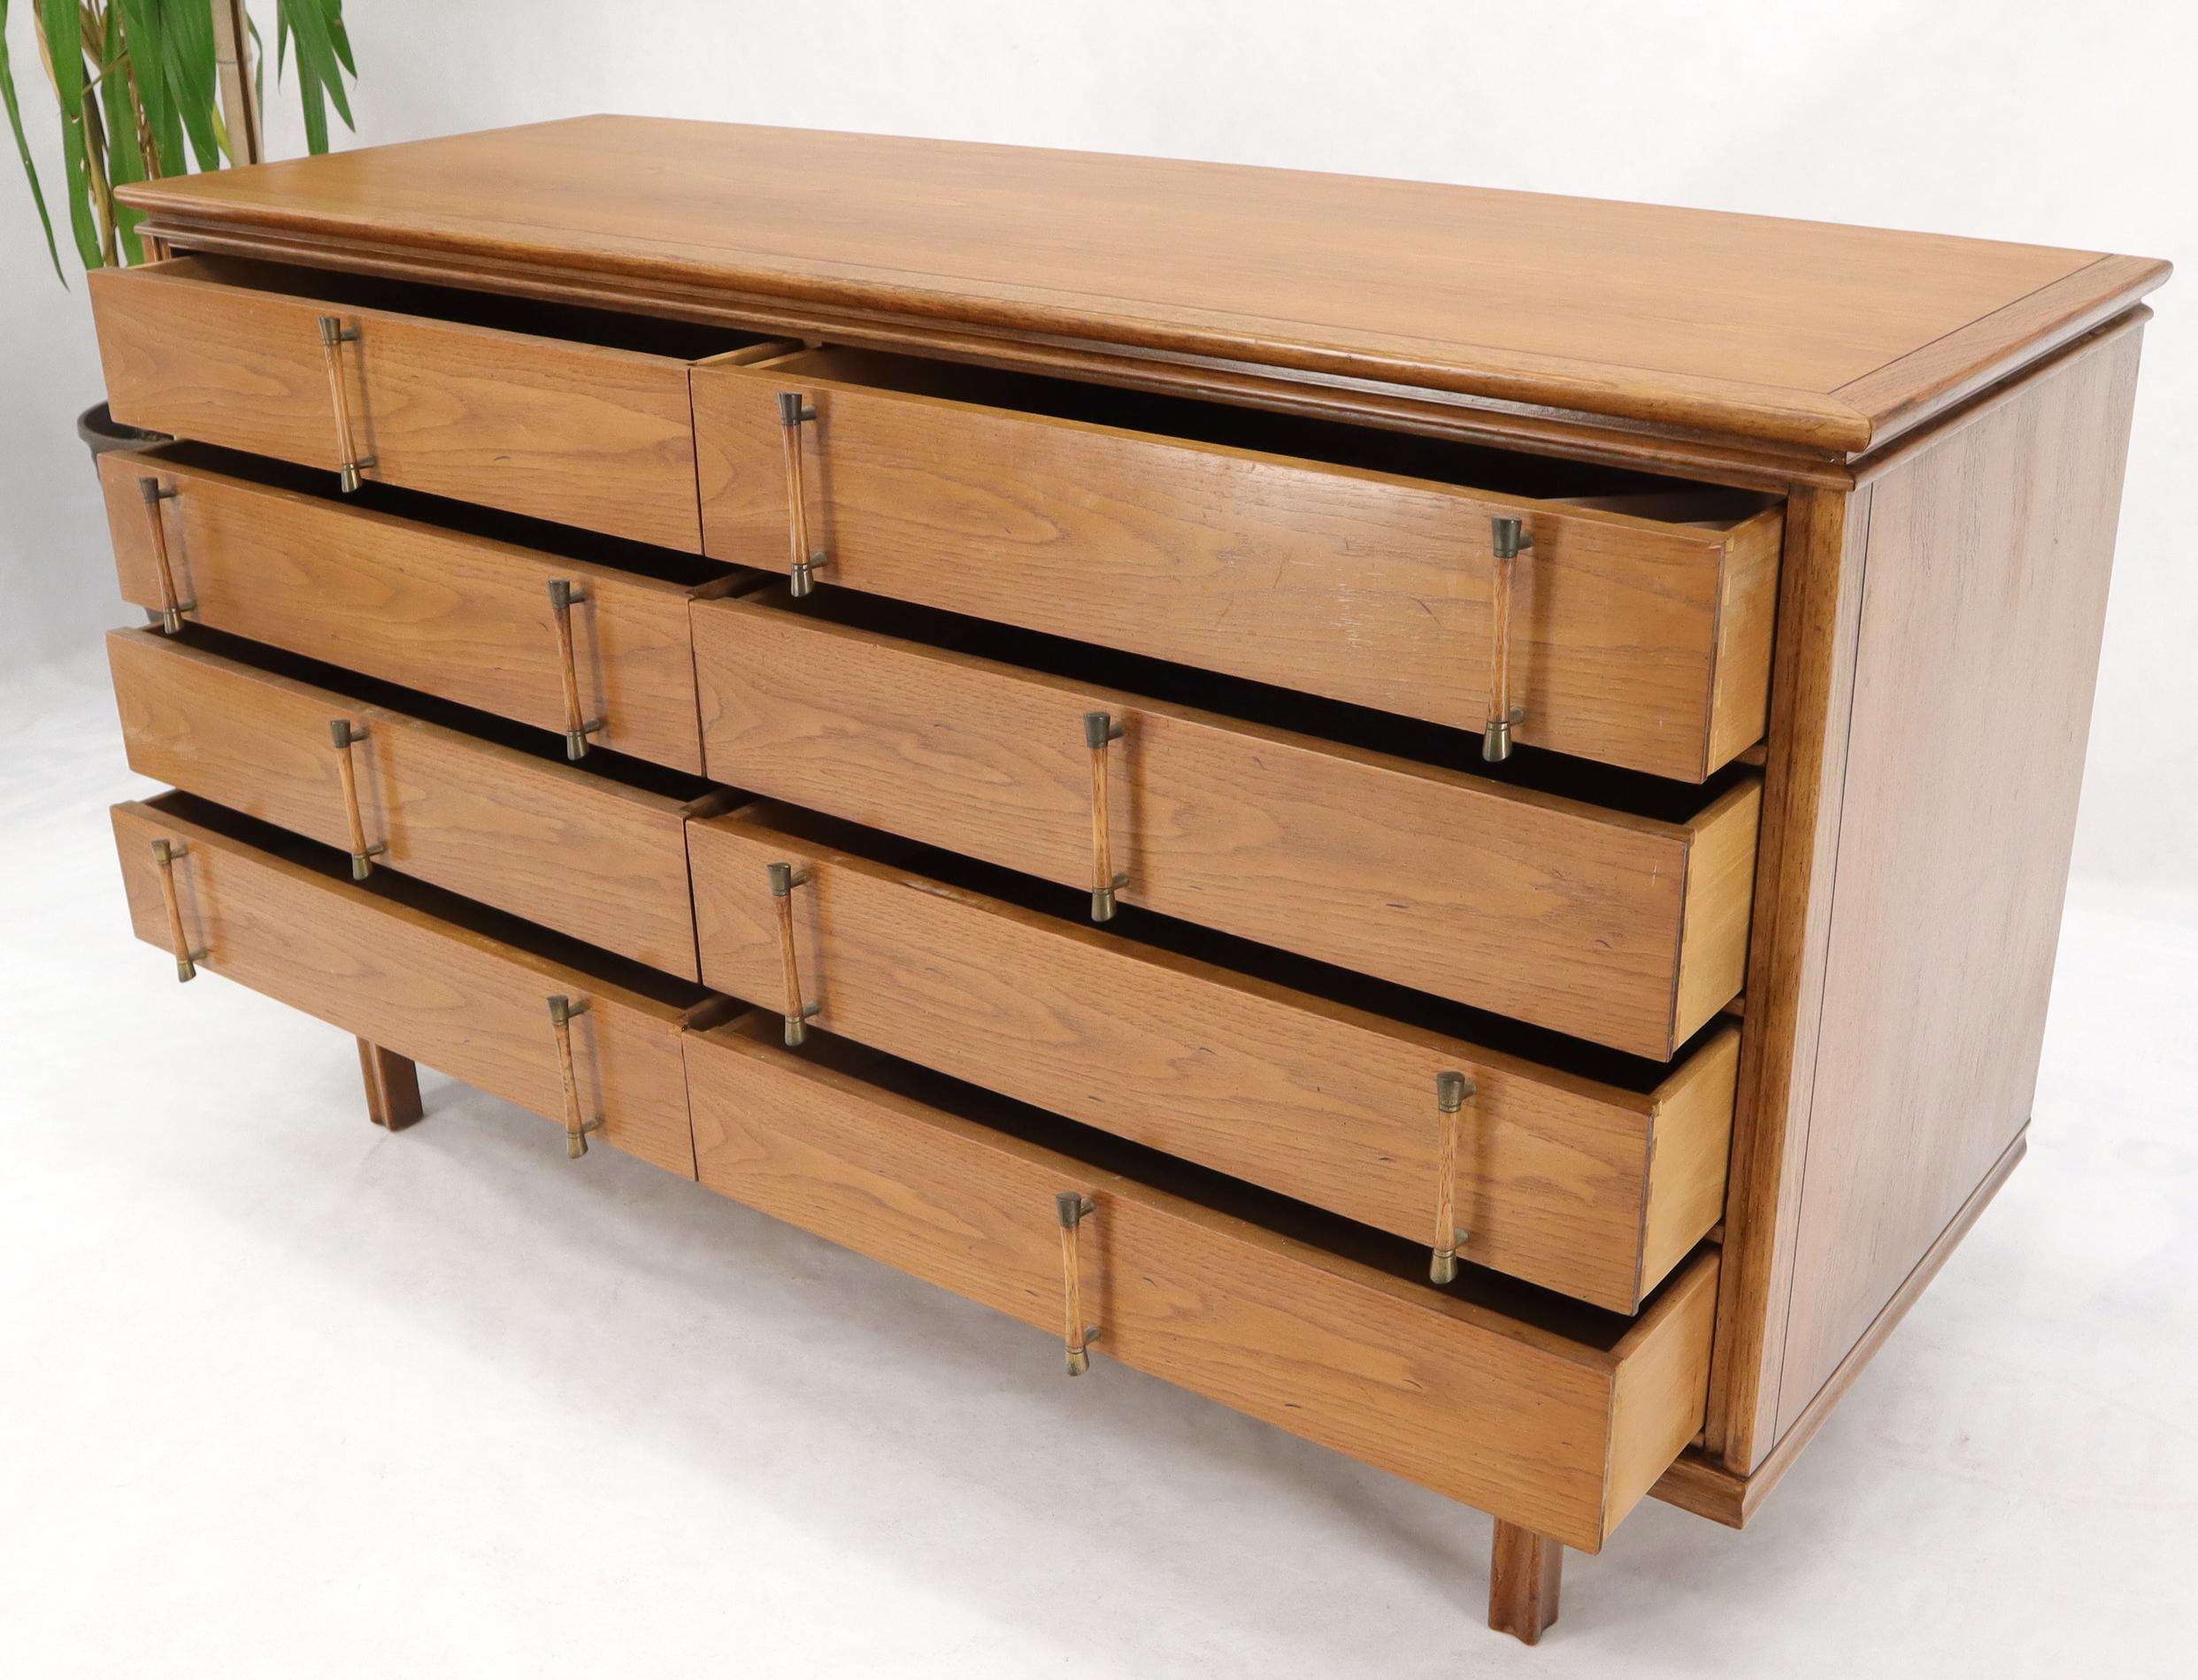 Decorative Light Walnut Faux Bamboo Pulls 8 Drawers Dresser In Excellent Condition For Sale In Rockaway, NJ